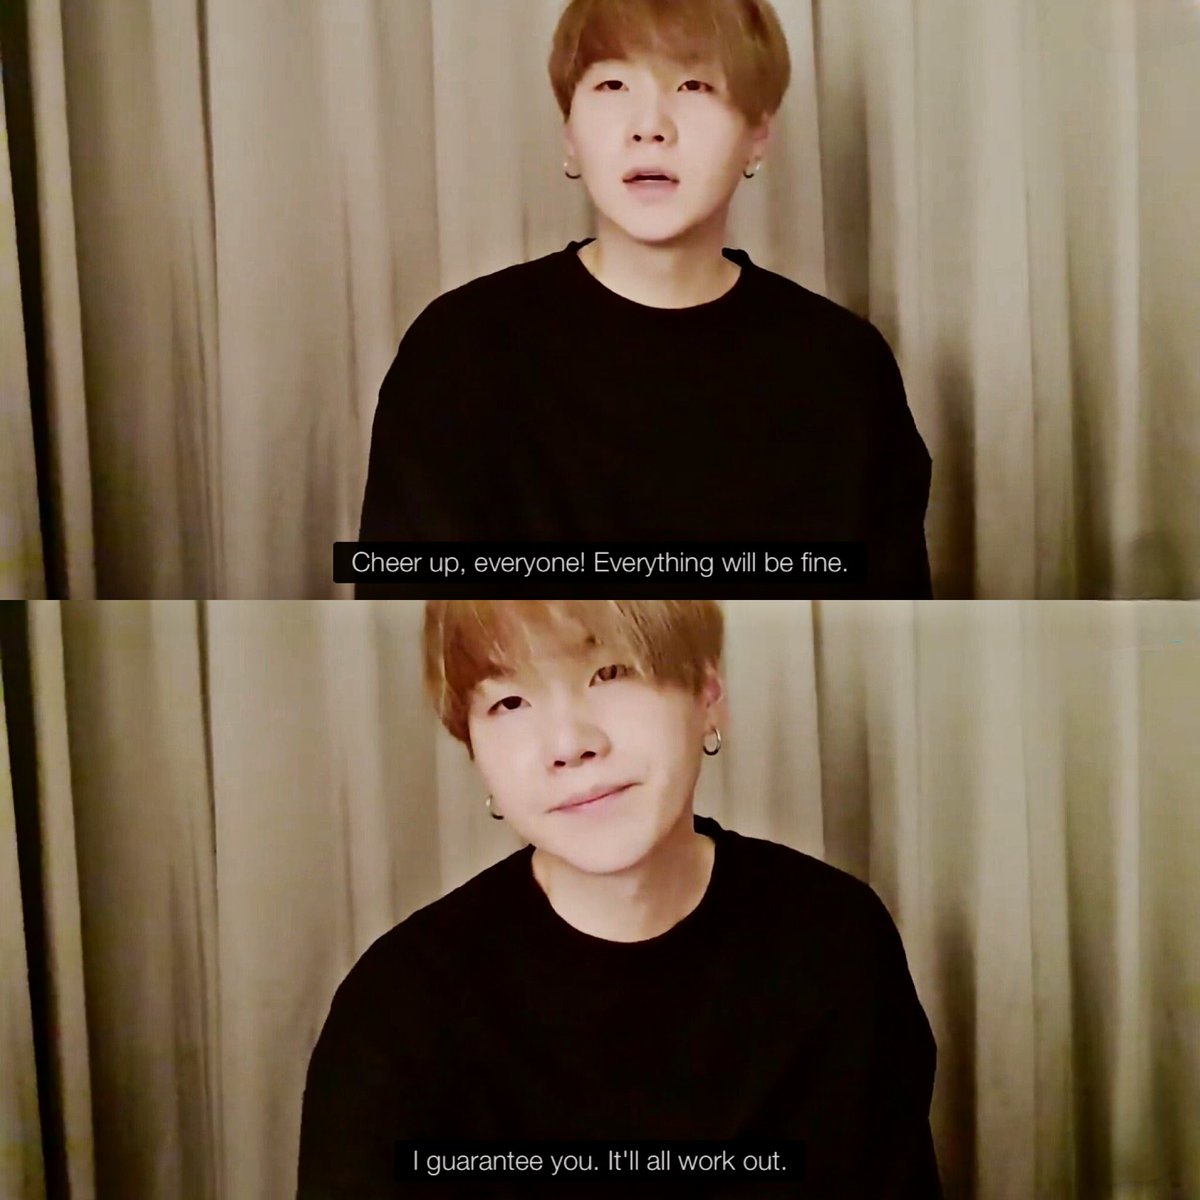 'Cheer up, everyone! Everything will be fine. I guarantee you. It'll all work out.' — Min yoongi 😭🤍